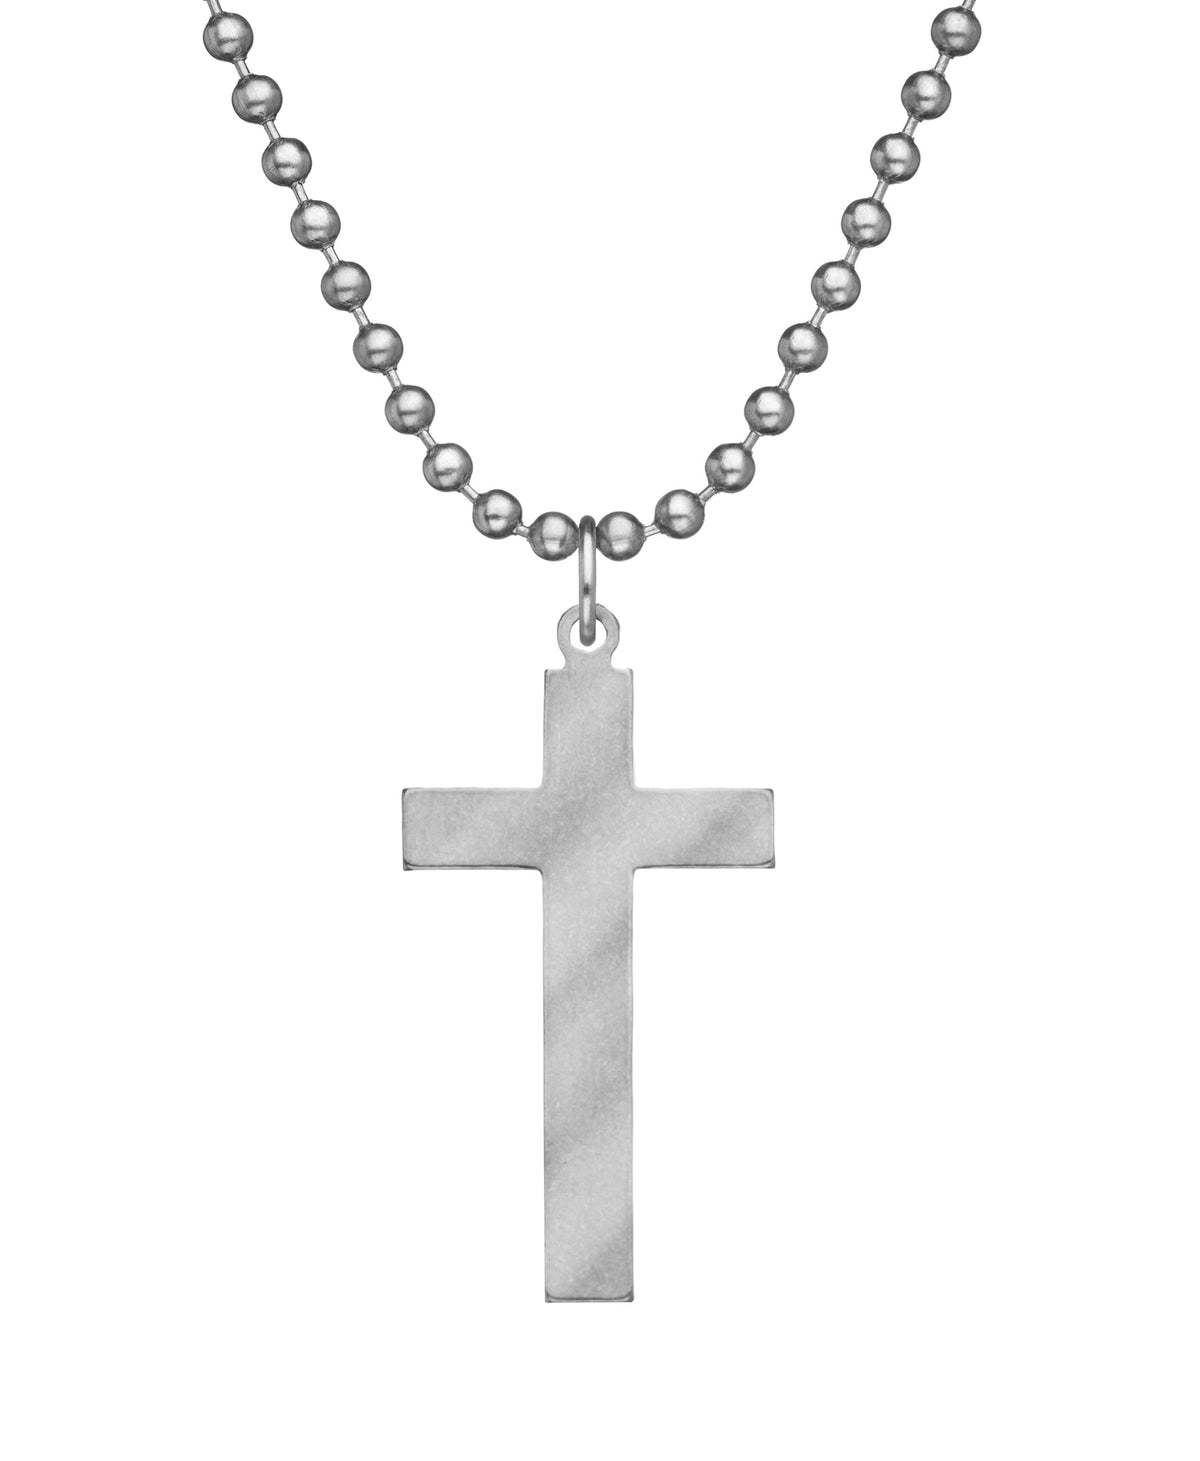 Genuine U.S. Military Issue Long Cross Necklace with Dog Tag Chain